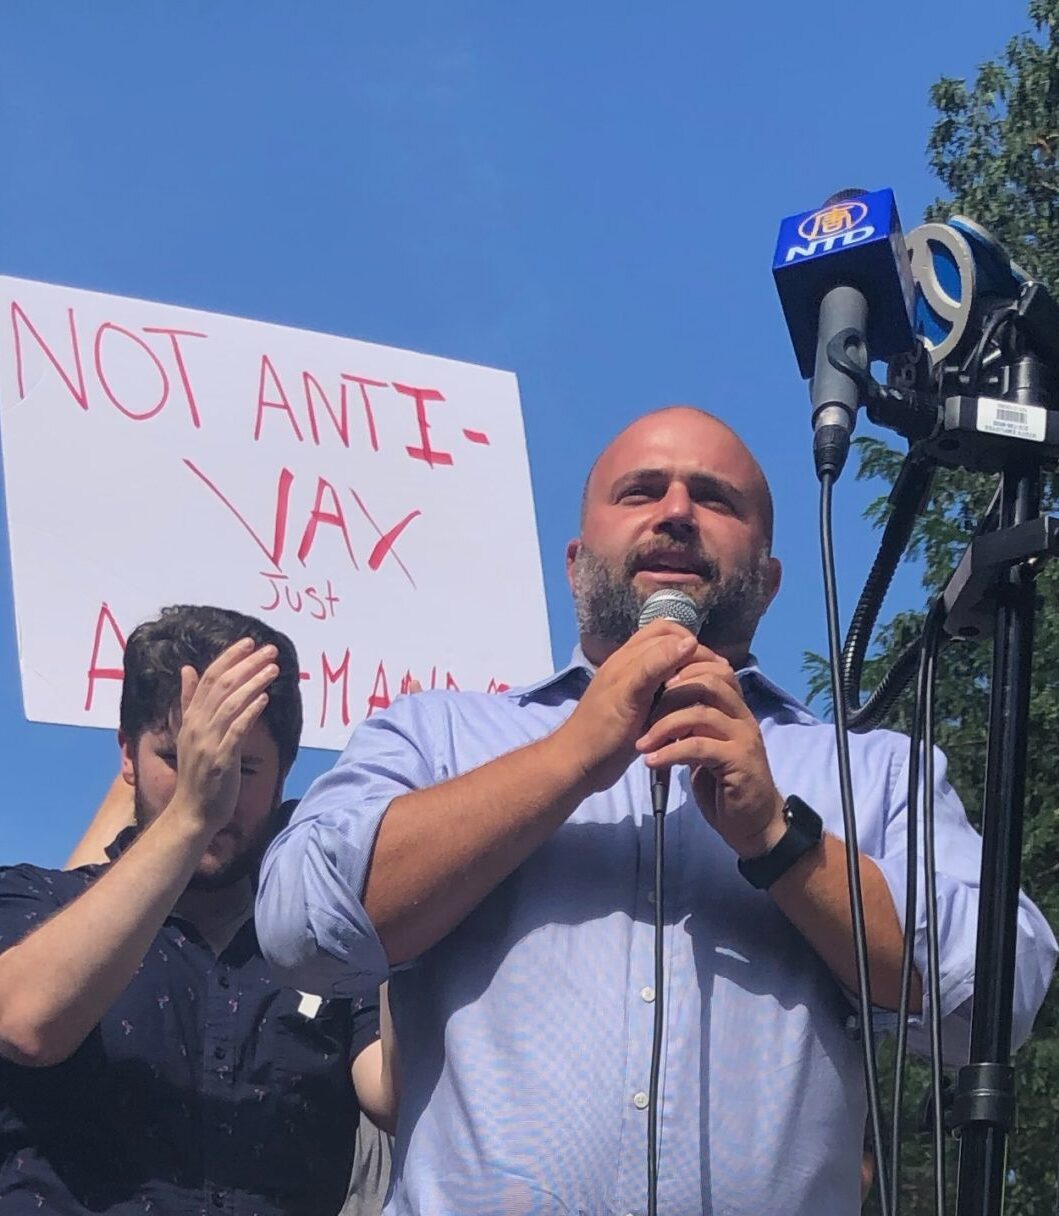 Joe rallies in front of Gracie Mansion against vaccination mandates.